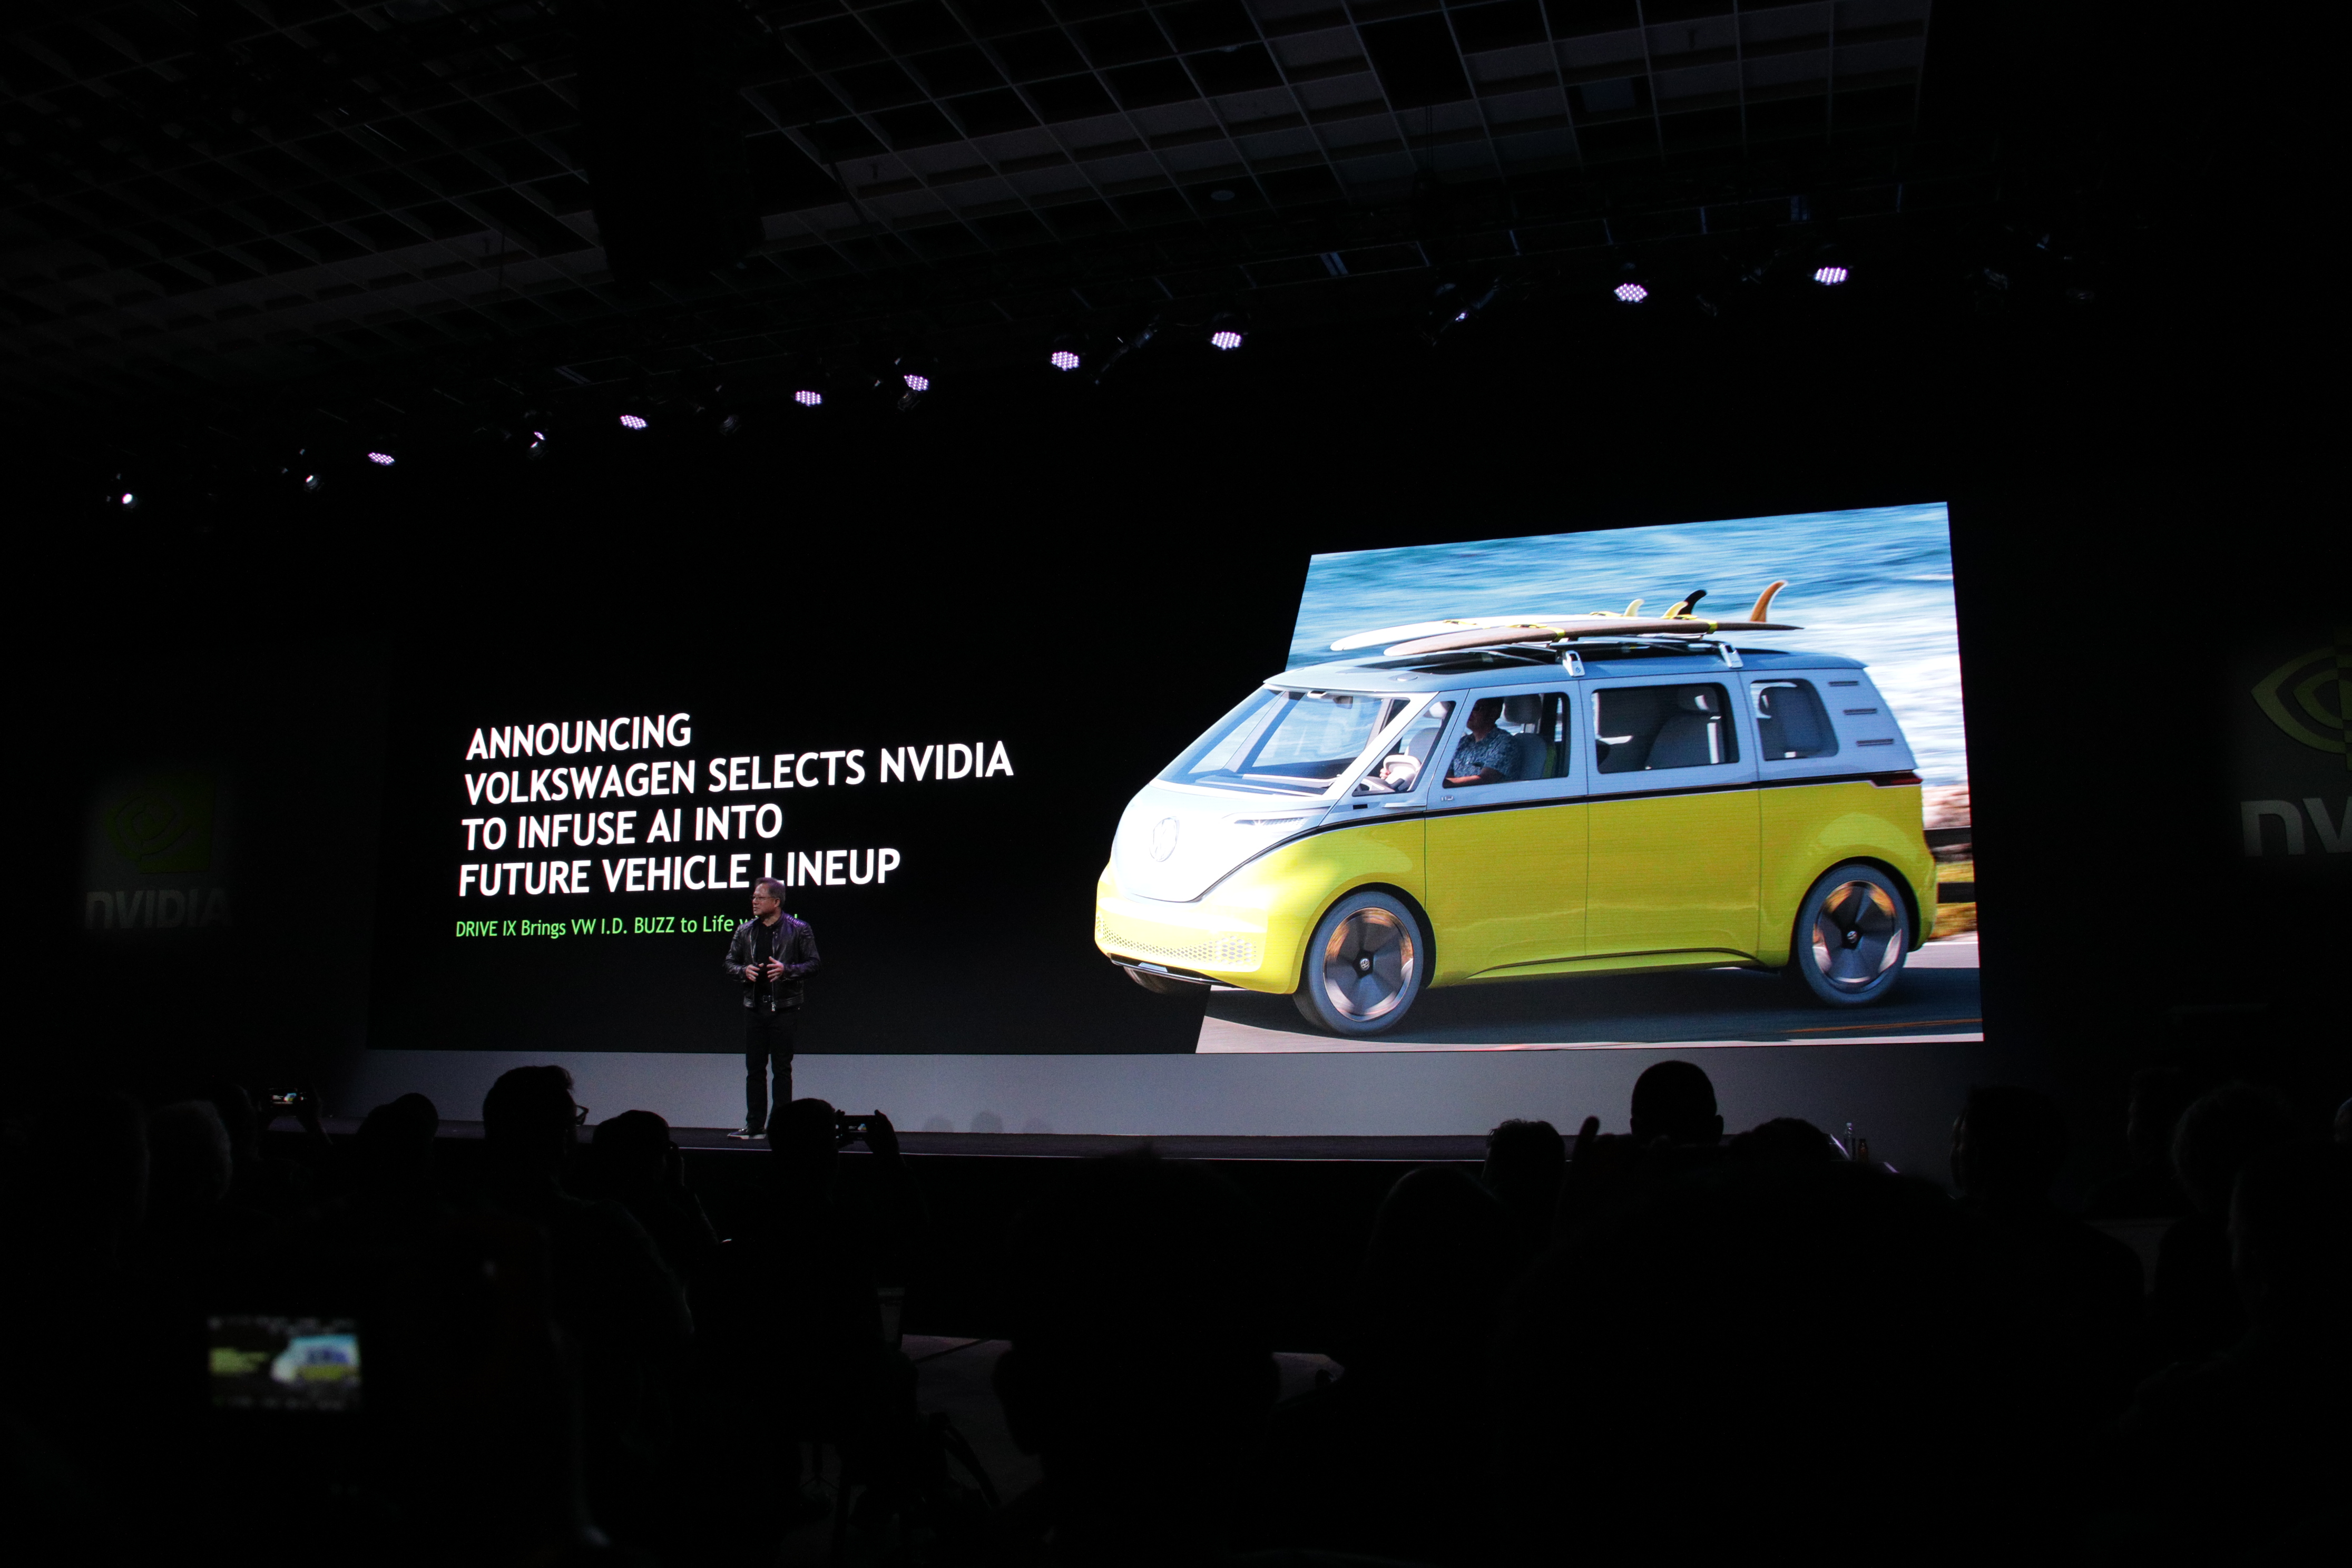 VW taps Nvidia to build AI into its new electric microbus and beyond